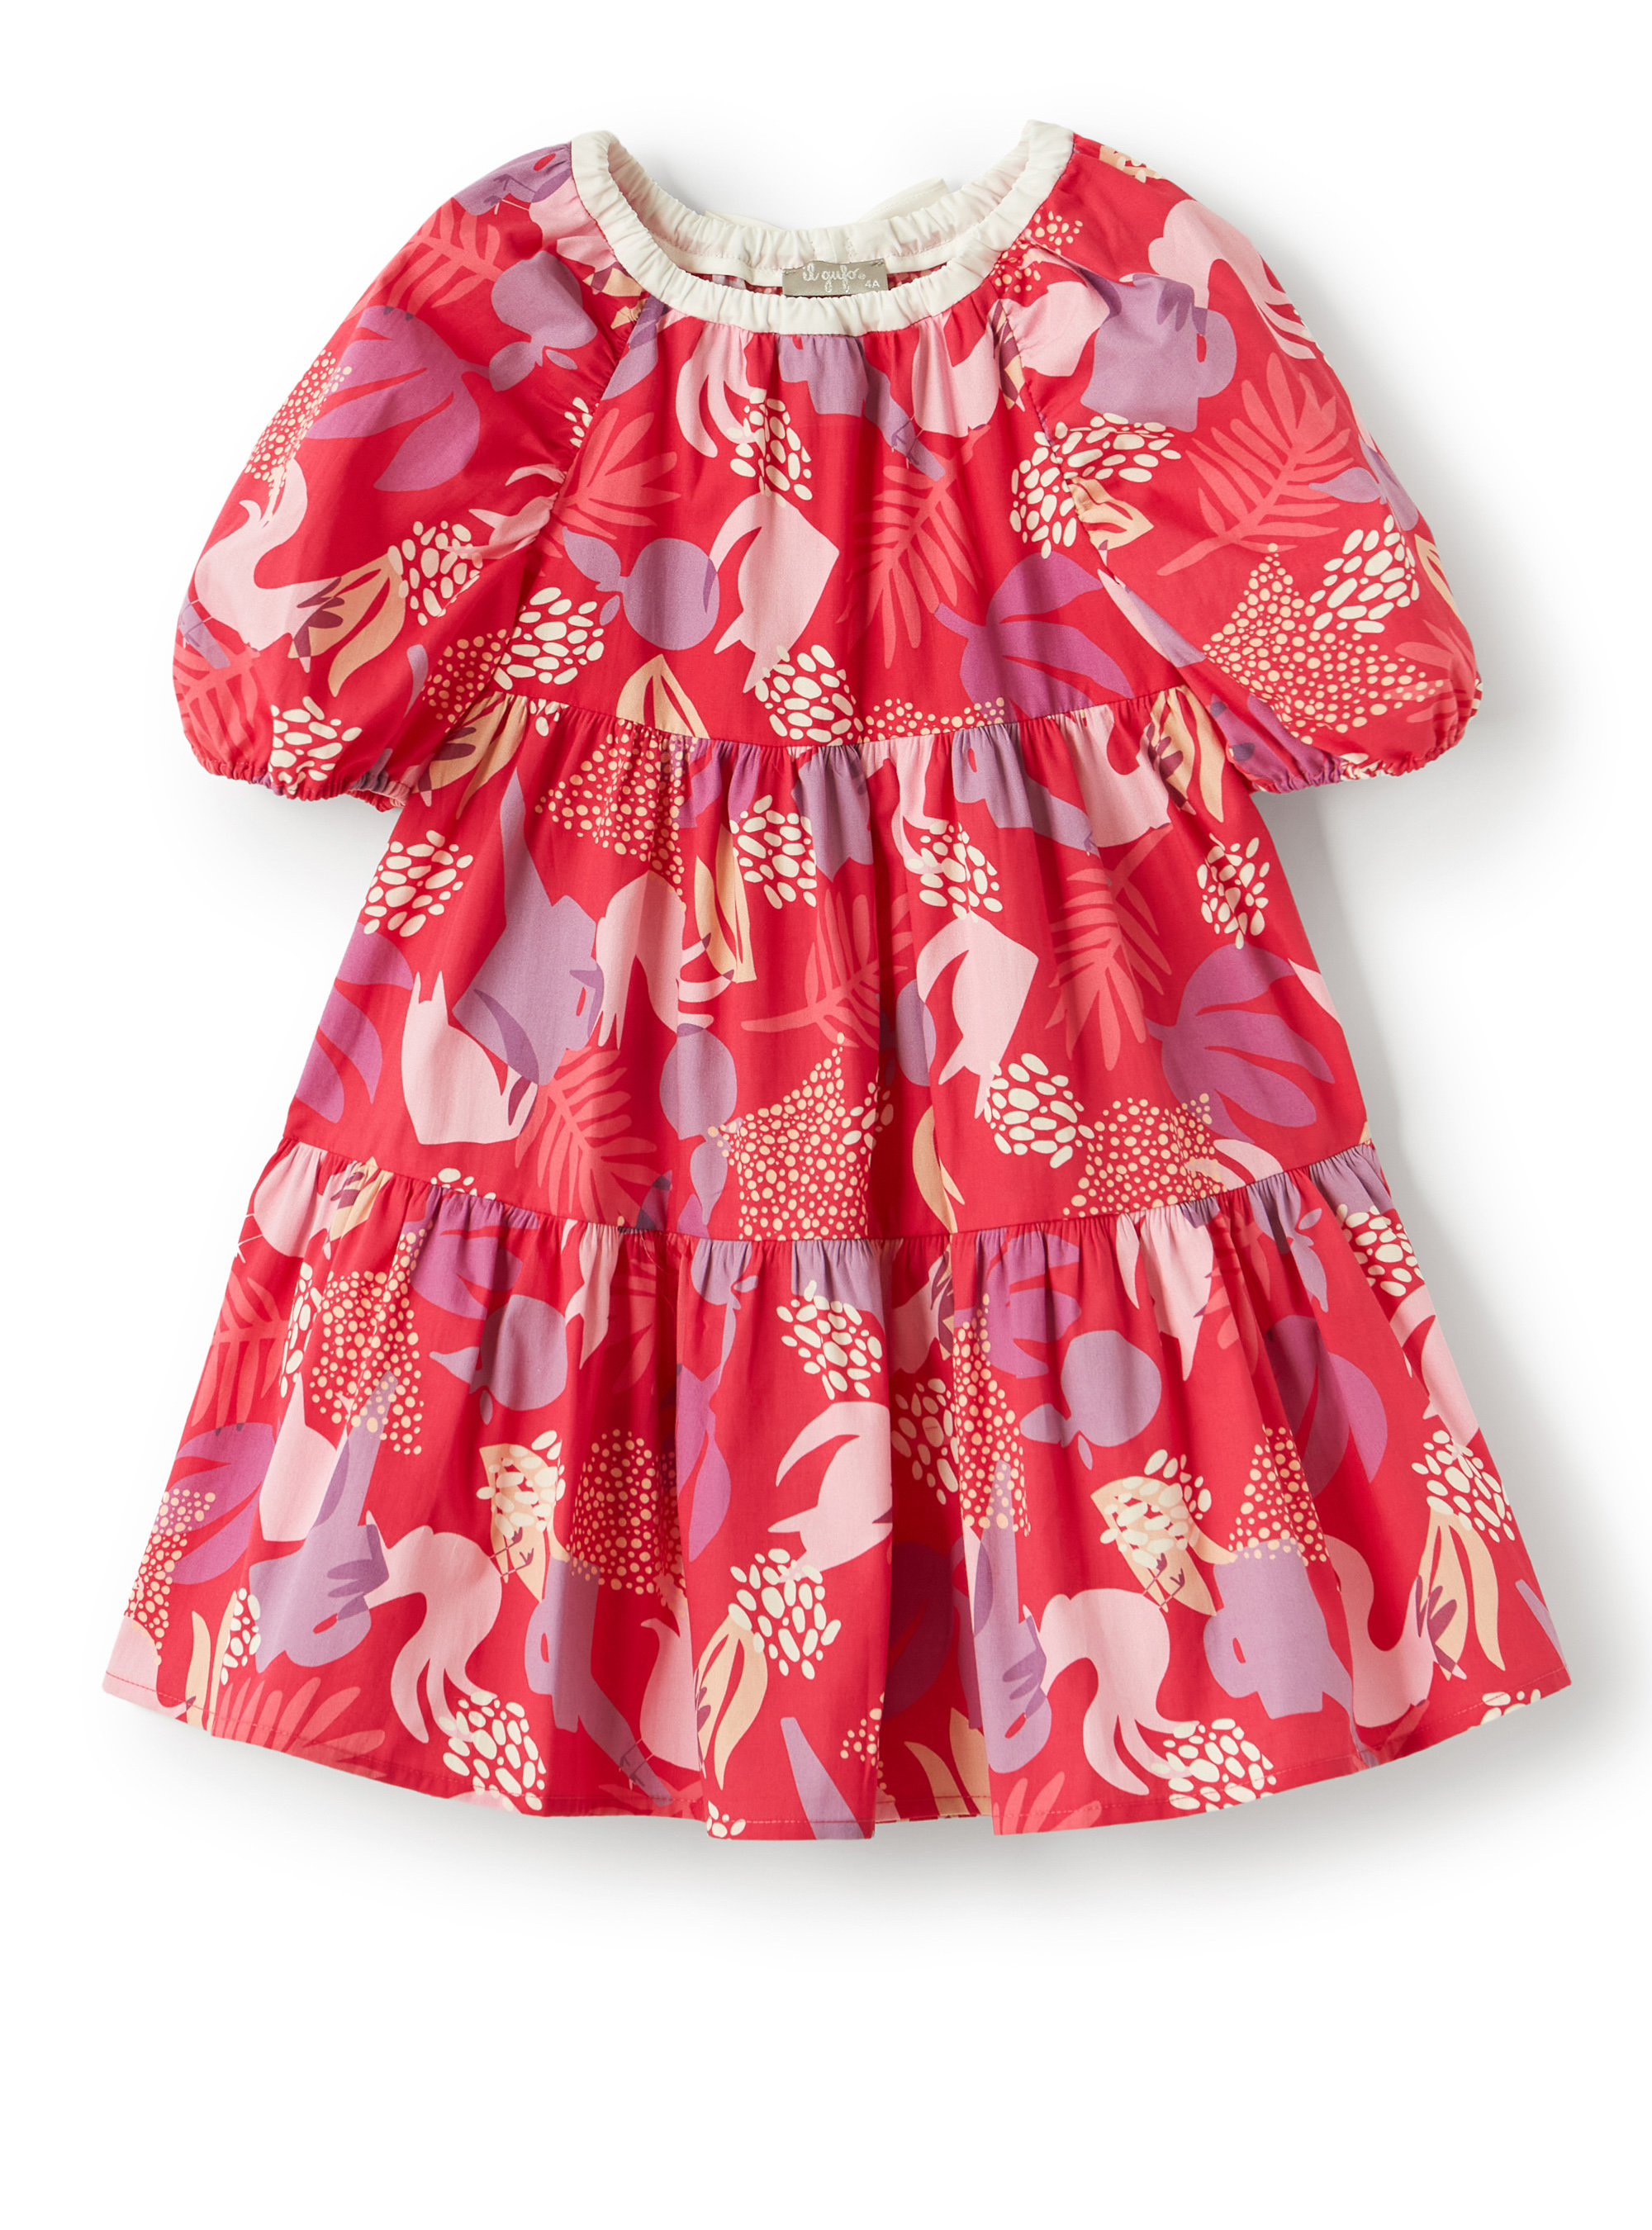 Dress with exclusive garden print - Red | Il Gufo